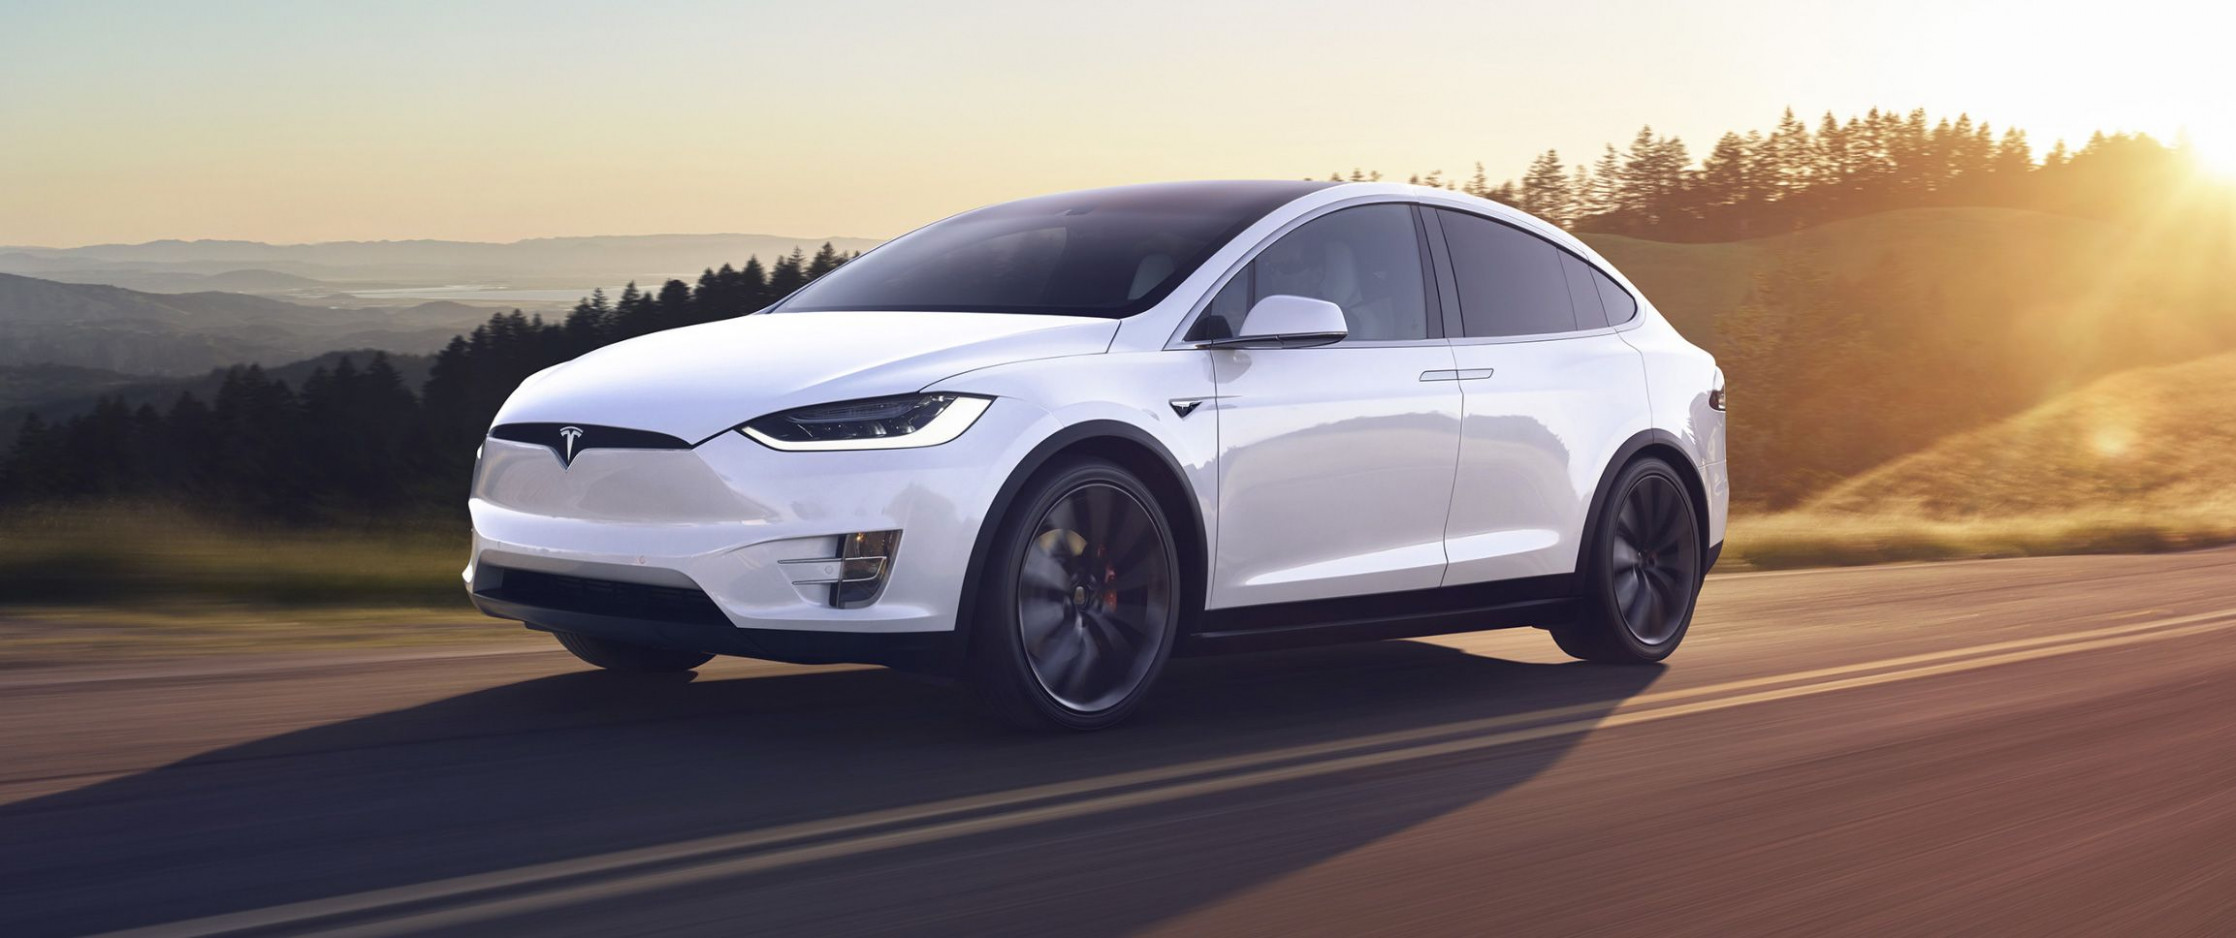 Redesign and Review price for tesla model x